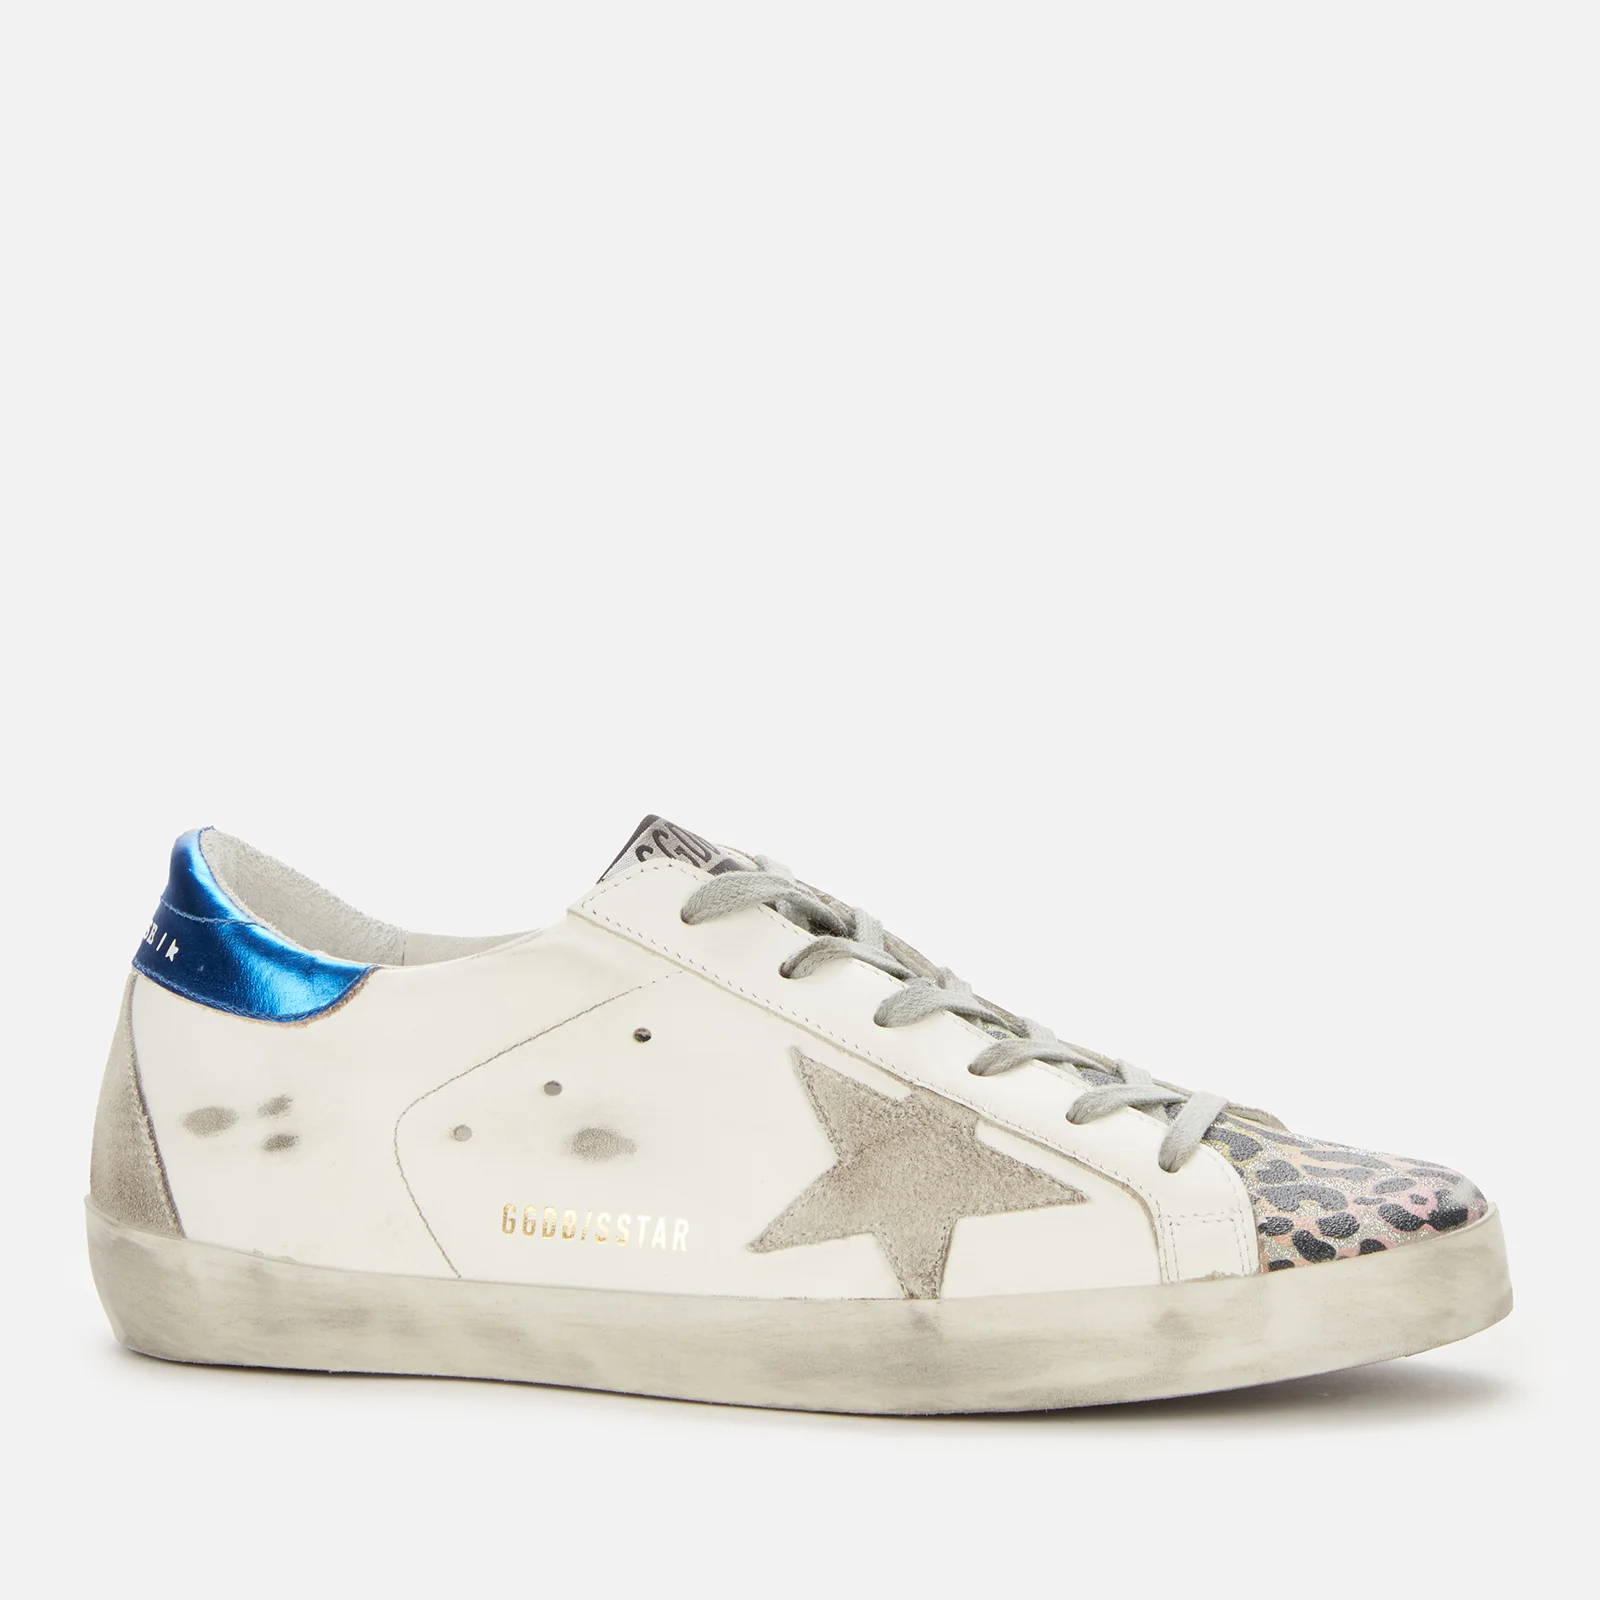 Golden Goose Women's Superstar Leather Trainers - White/Silver/Multi Leopard Image 1